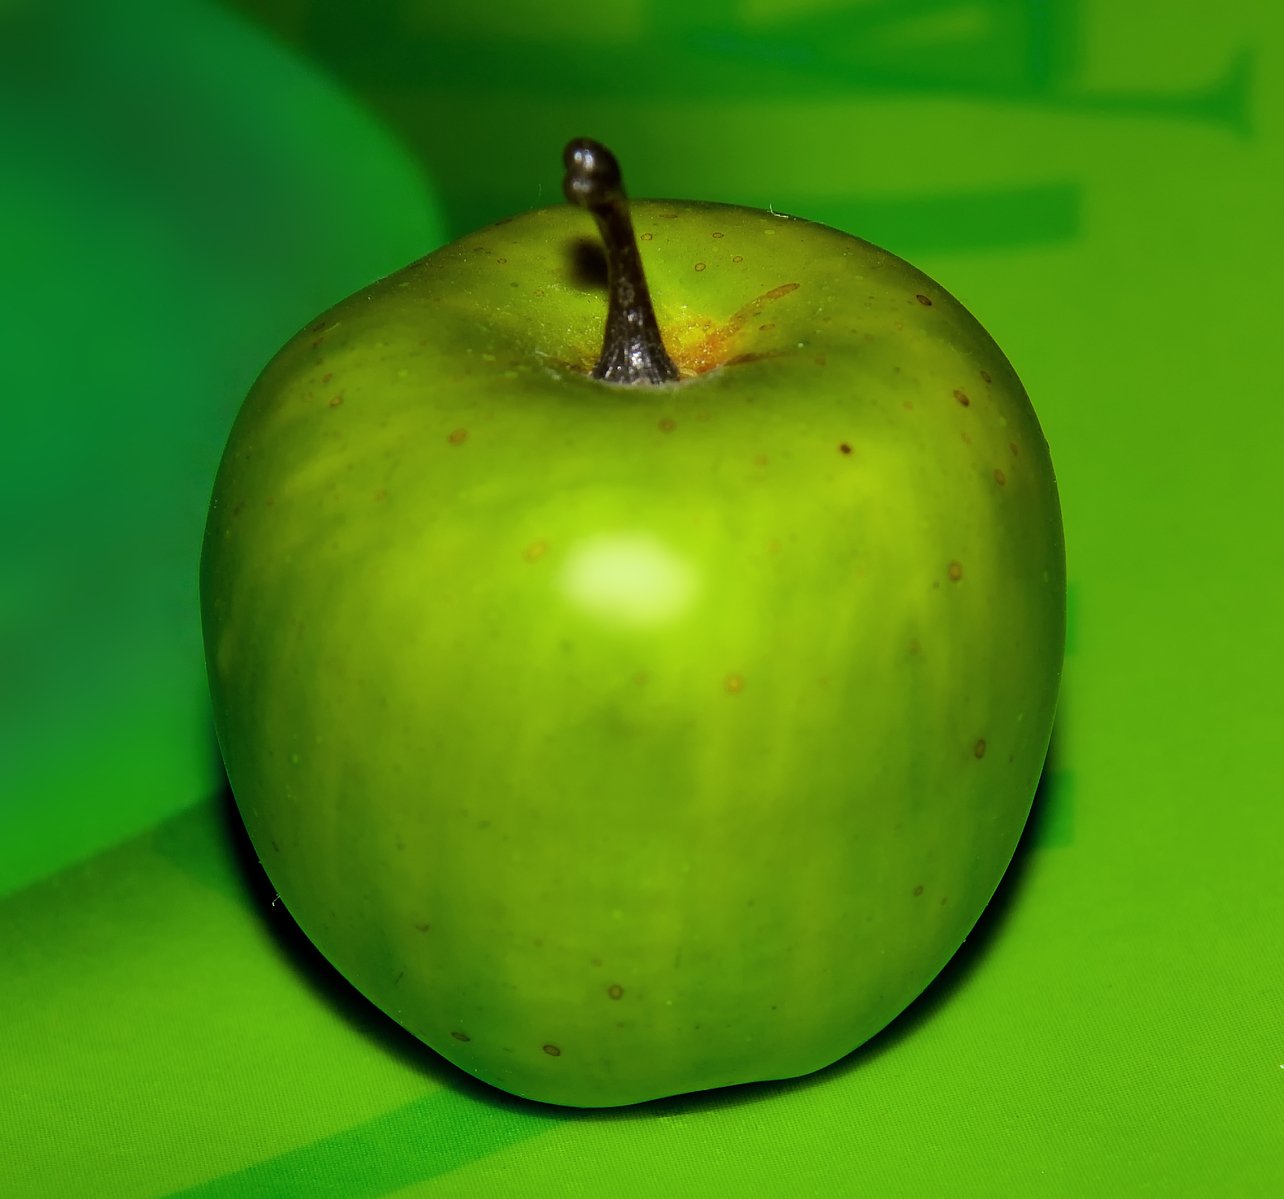 an apple with a black stem sitting on a green surface